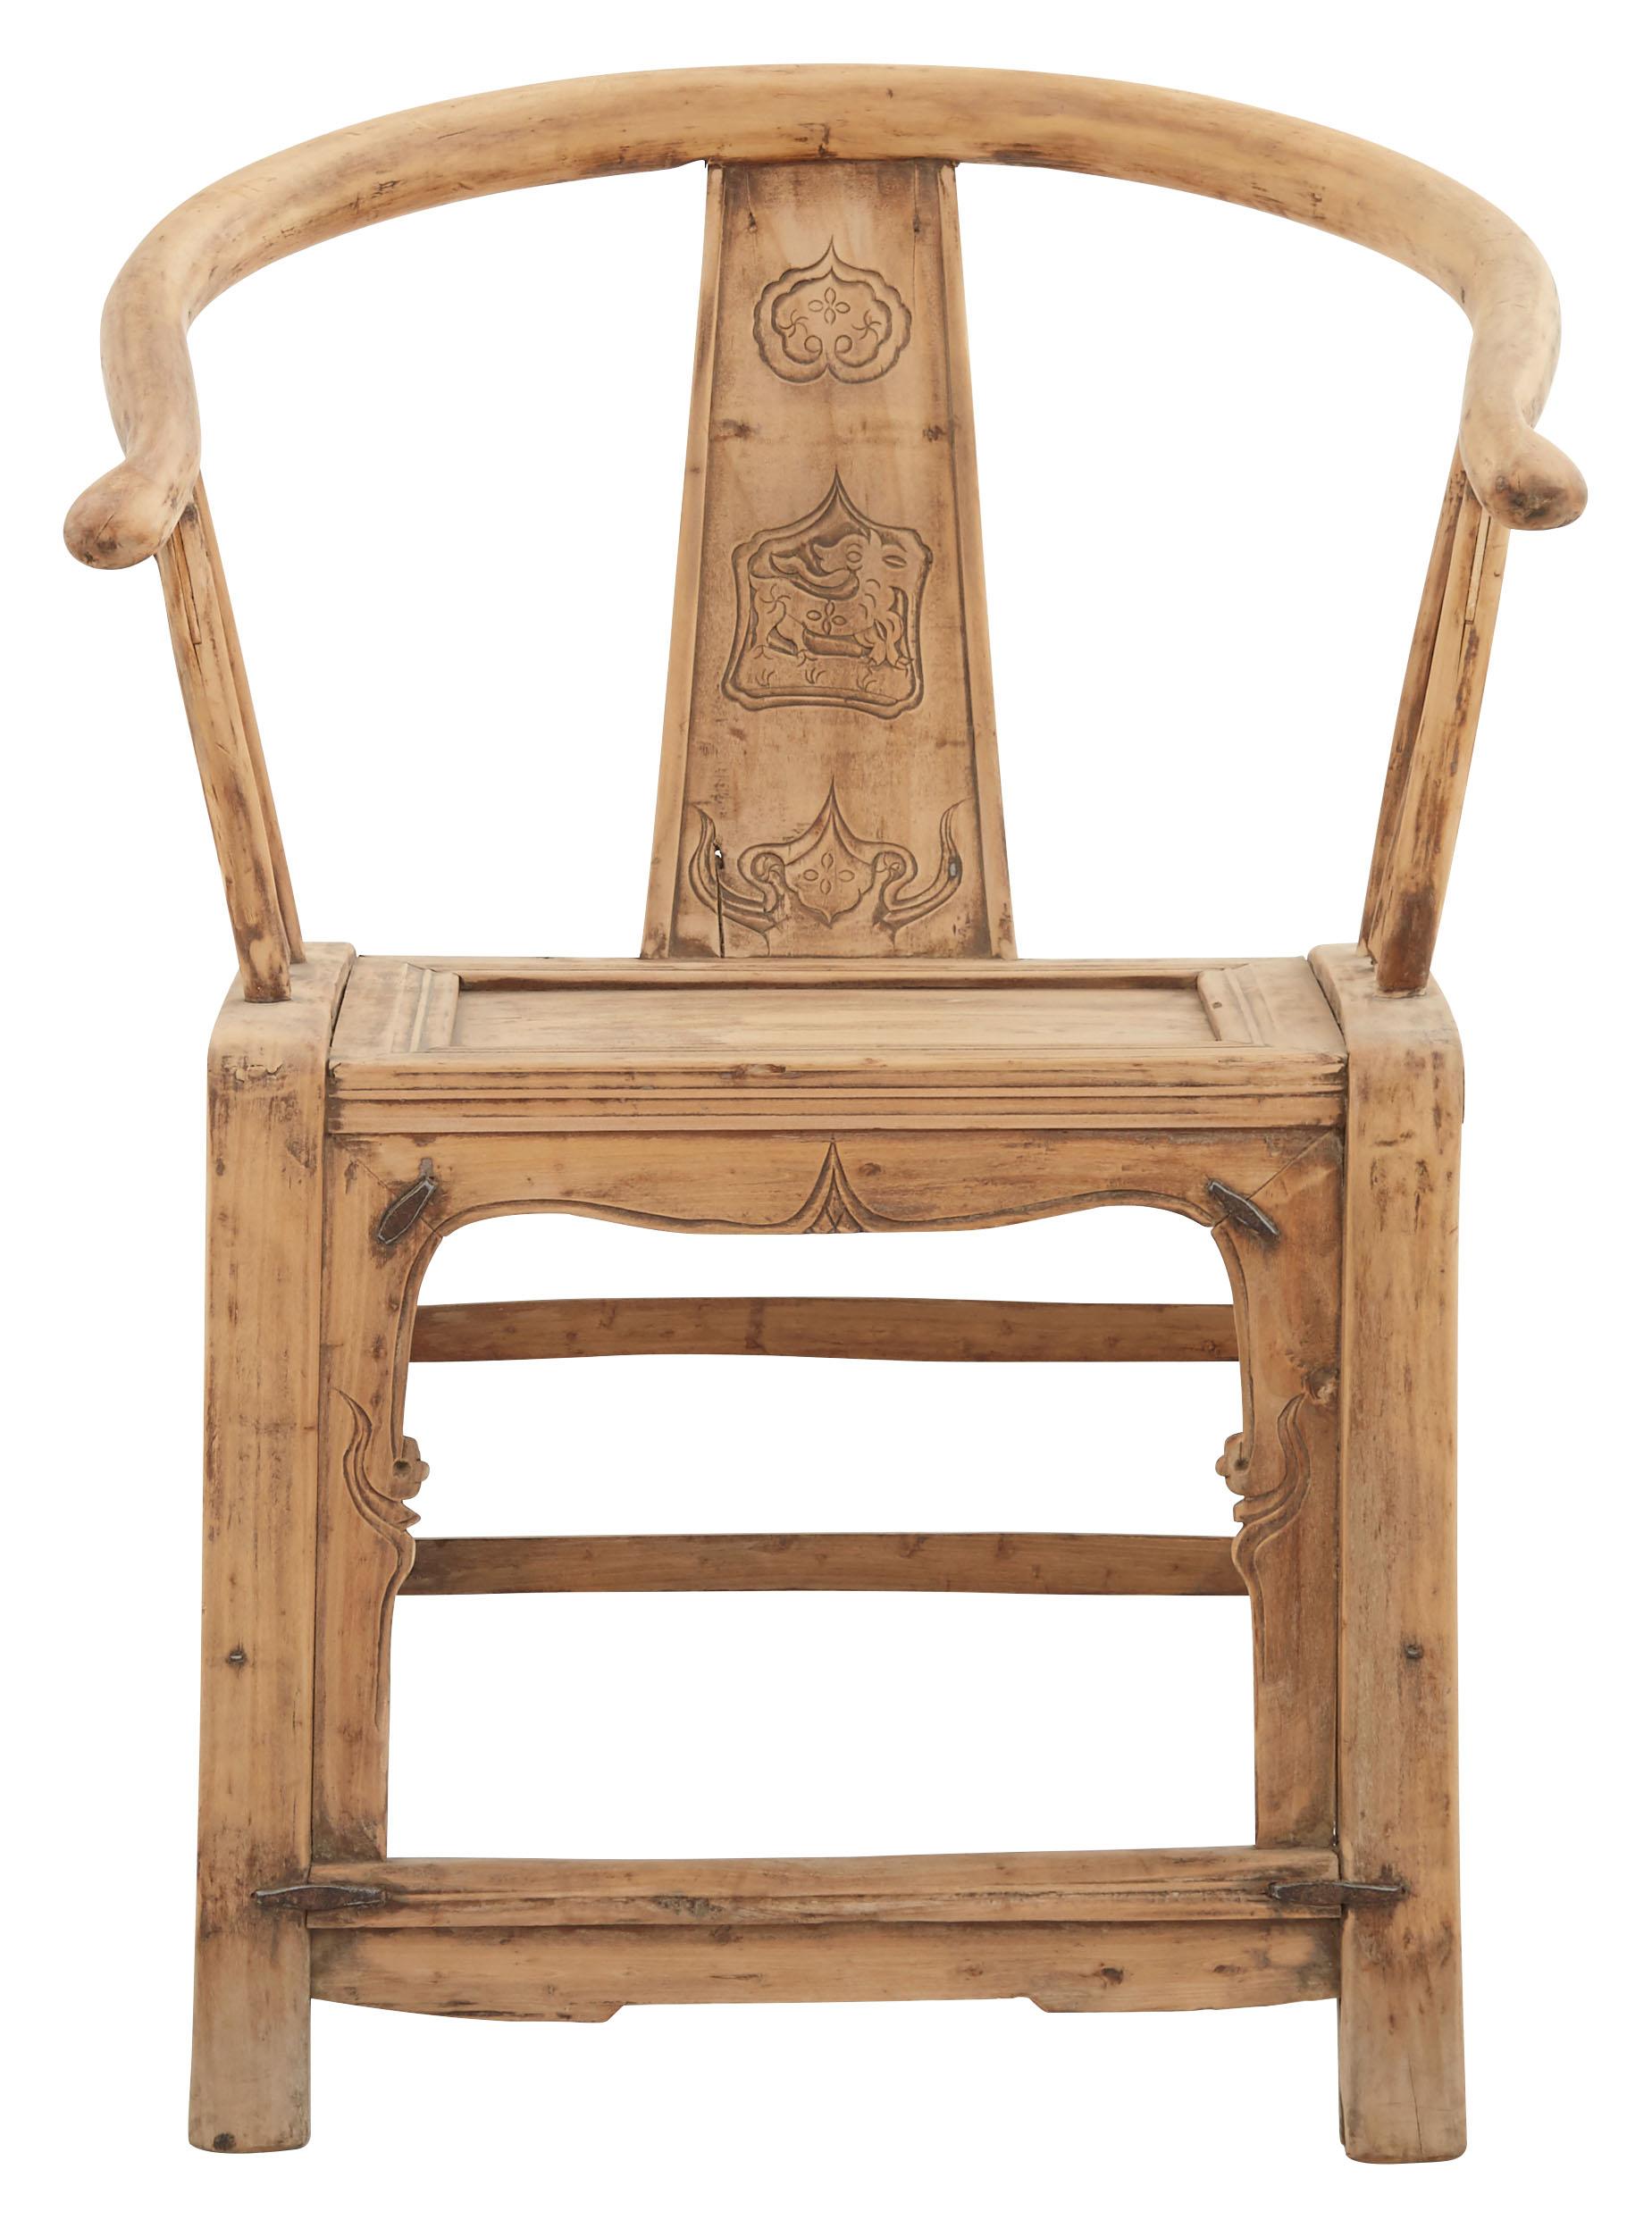 Hand-Carved 19th Century Bleached Elm Horseshoe Chair For Sale